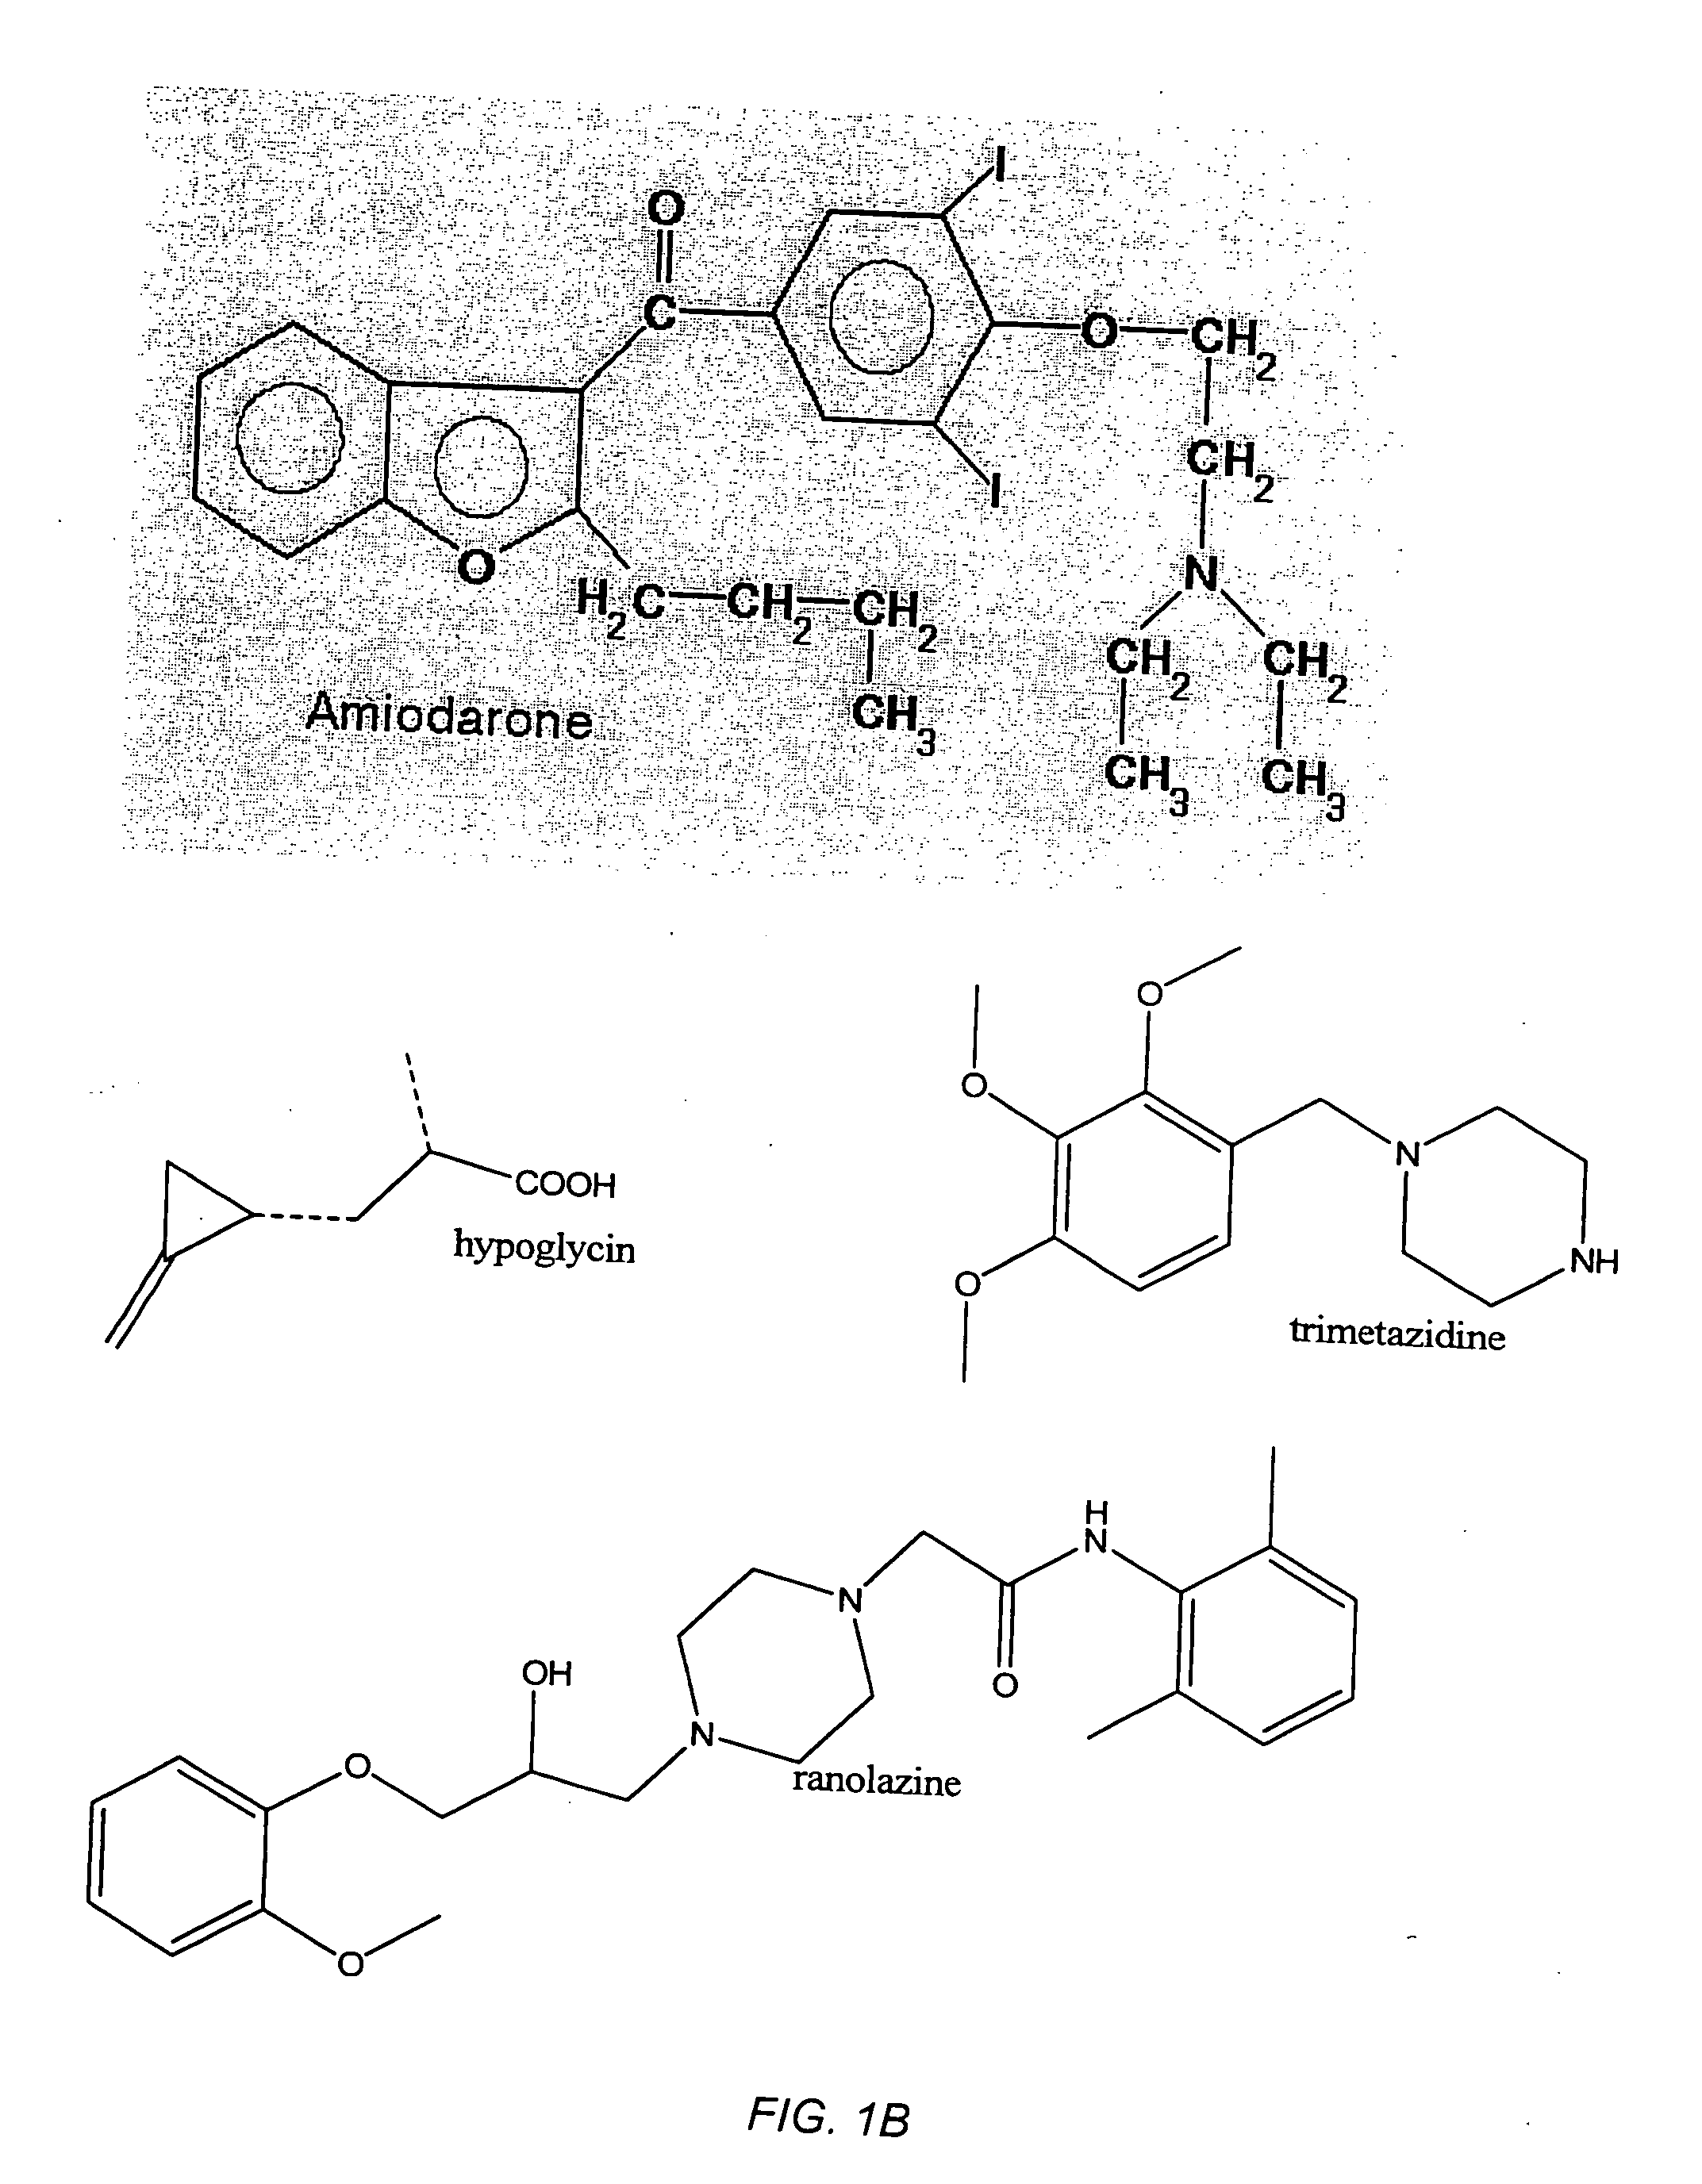 Systems and methods for treating human inflammatory and proliferative diseases and wounds, with fatty acid metabolism inhibitors and/or glycolytic inhibitors